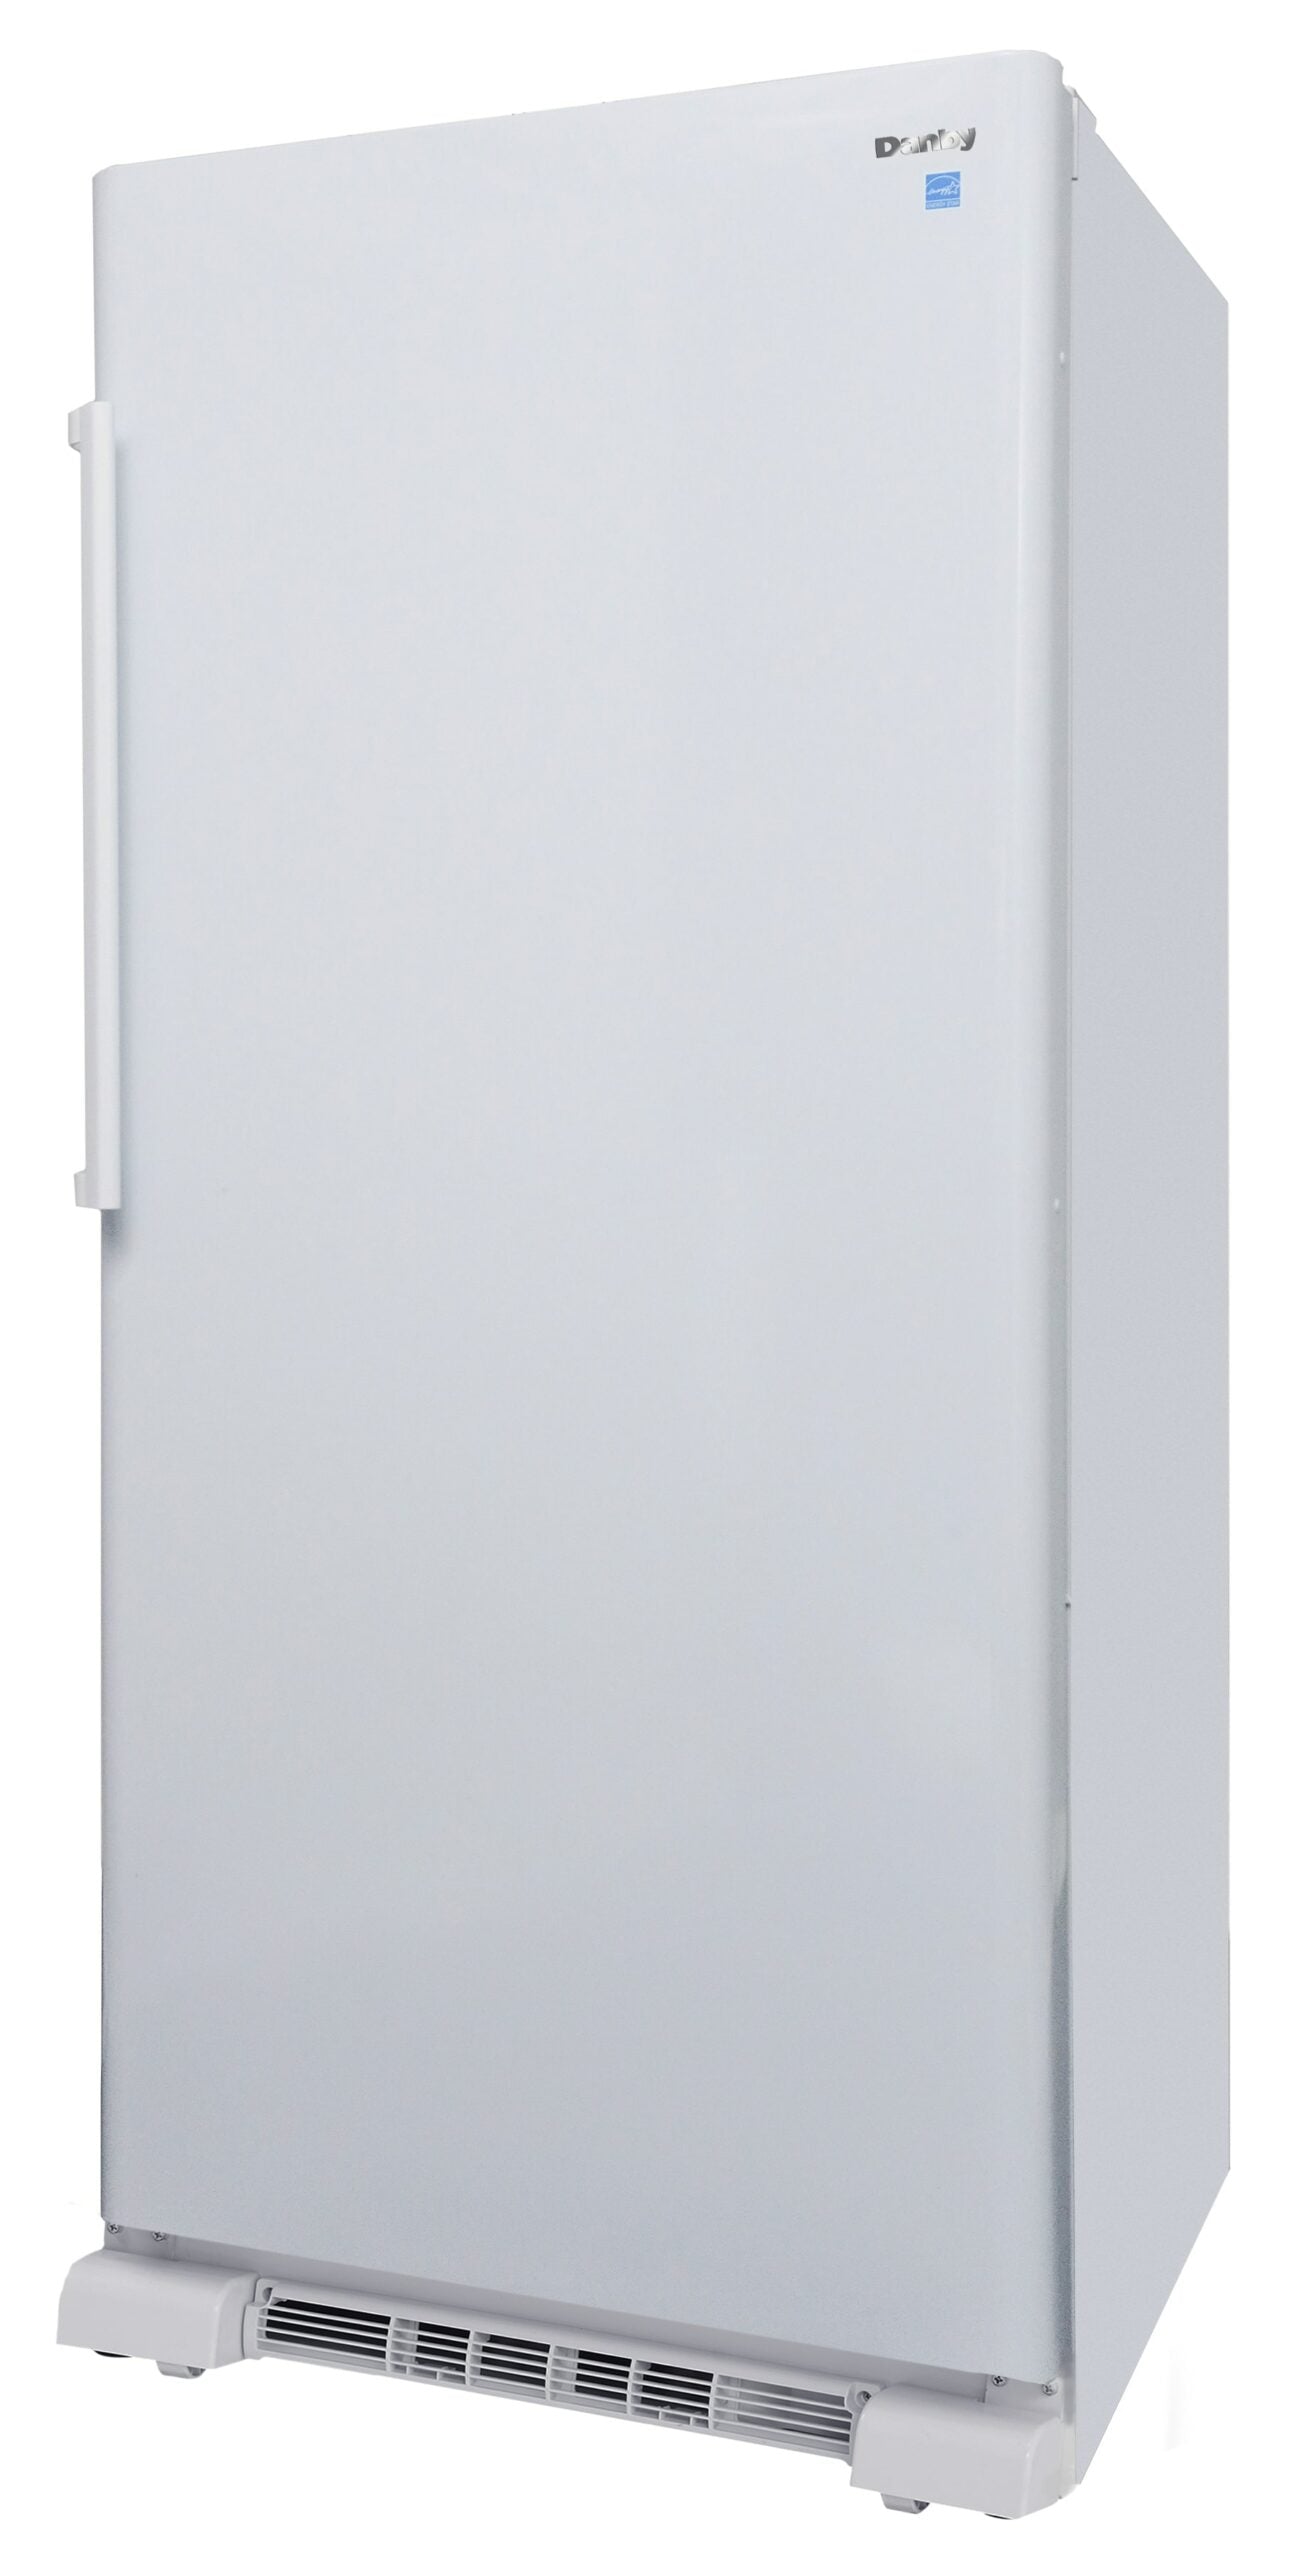 Danby - 76.05 Inch 17 cu. ft Built In / Integrated Refrigerator in White - DAR170A3WDD